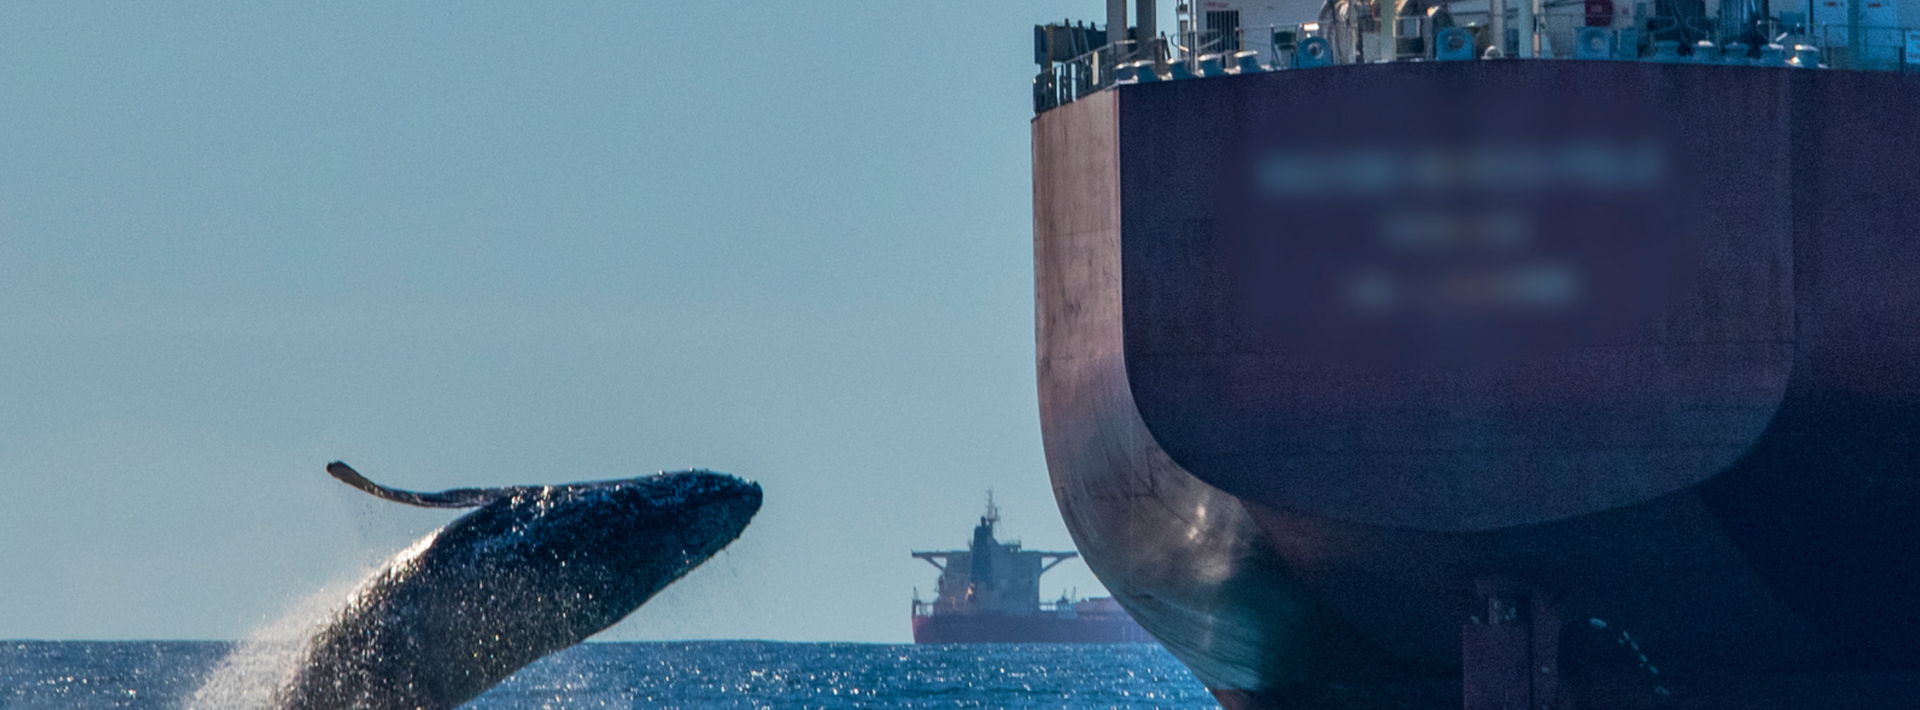 A whale near a large vessel at sea.